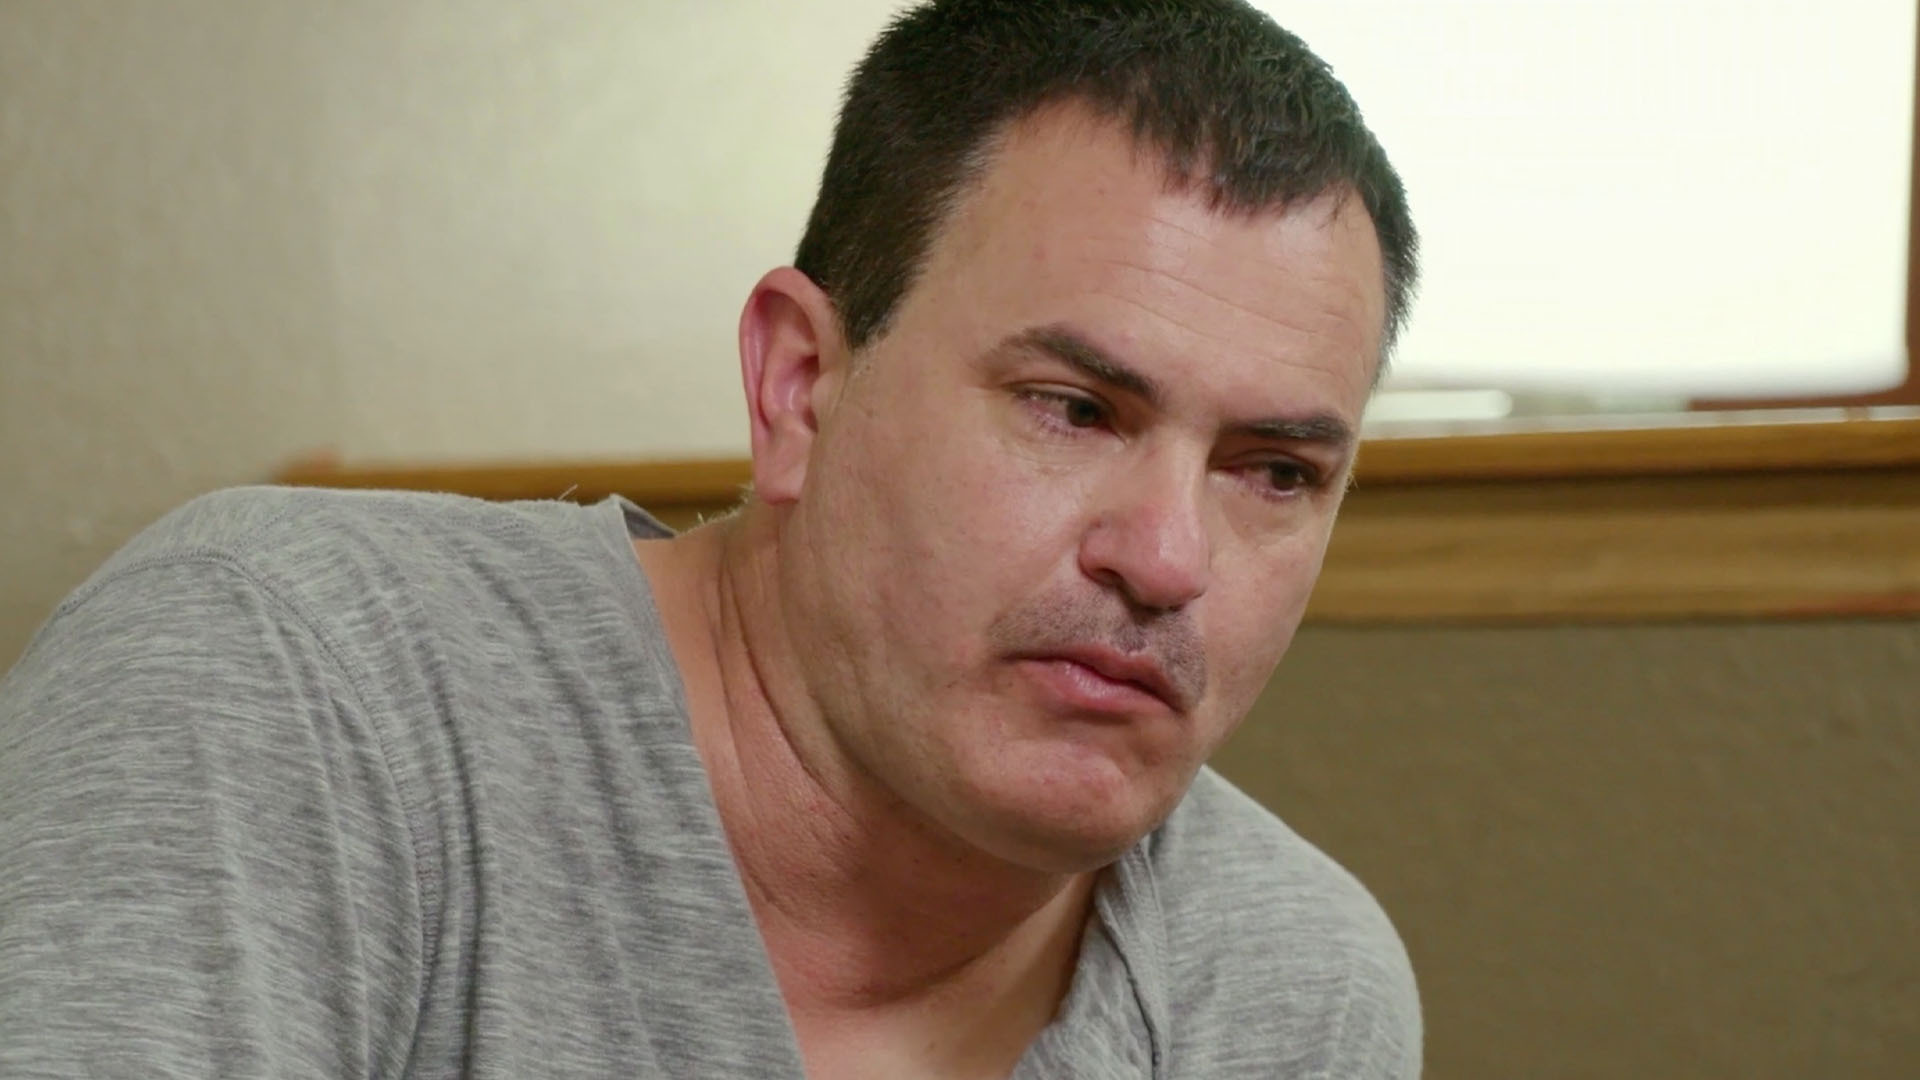 Watch Shawn Gets Emotional Over His Children | Life After Lockup Video Extras